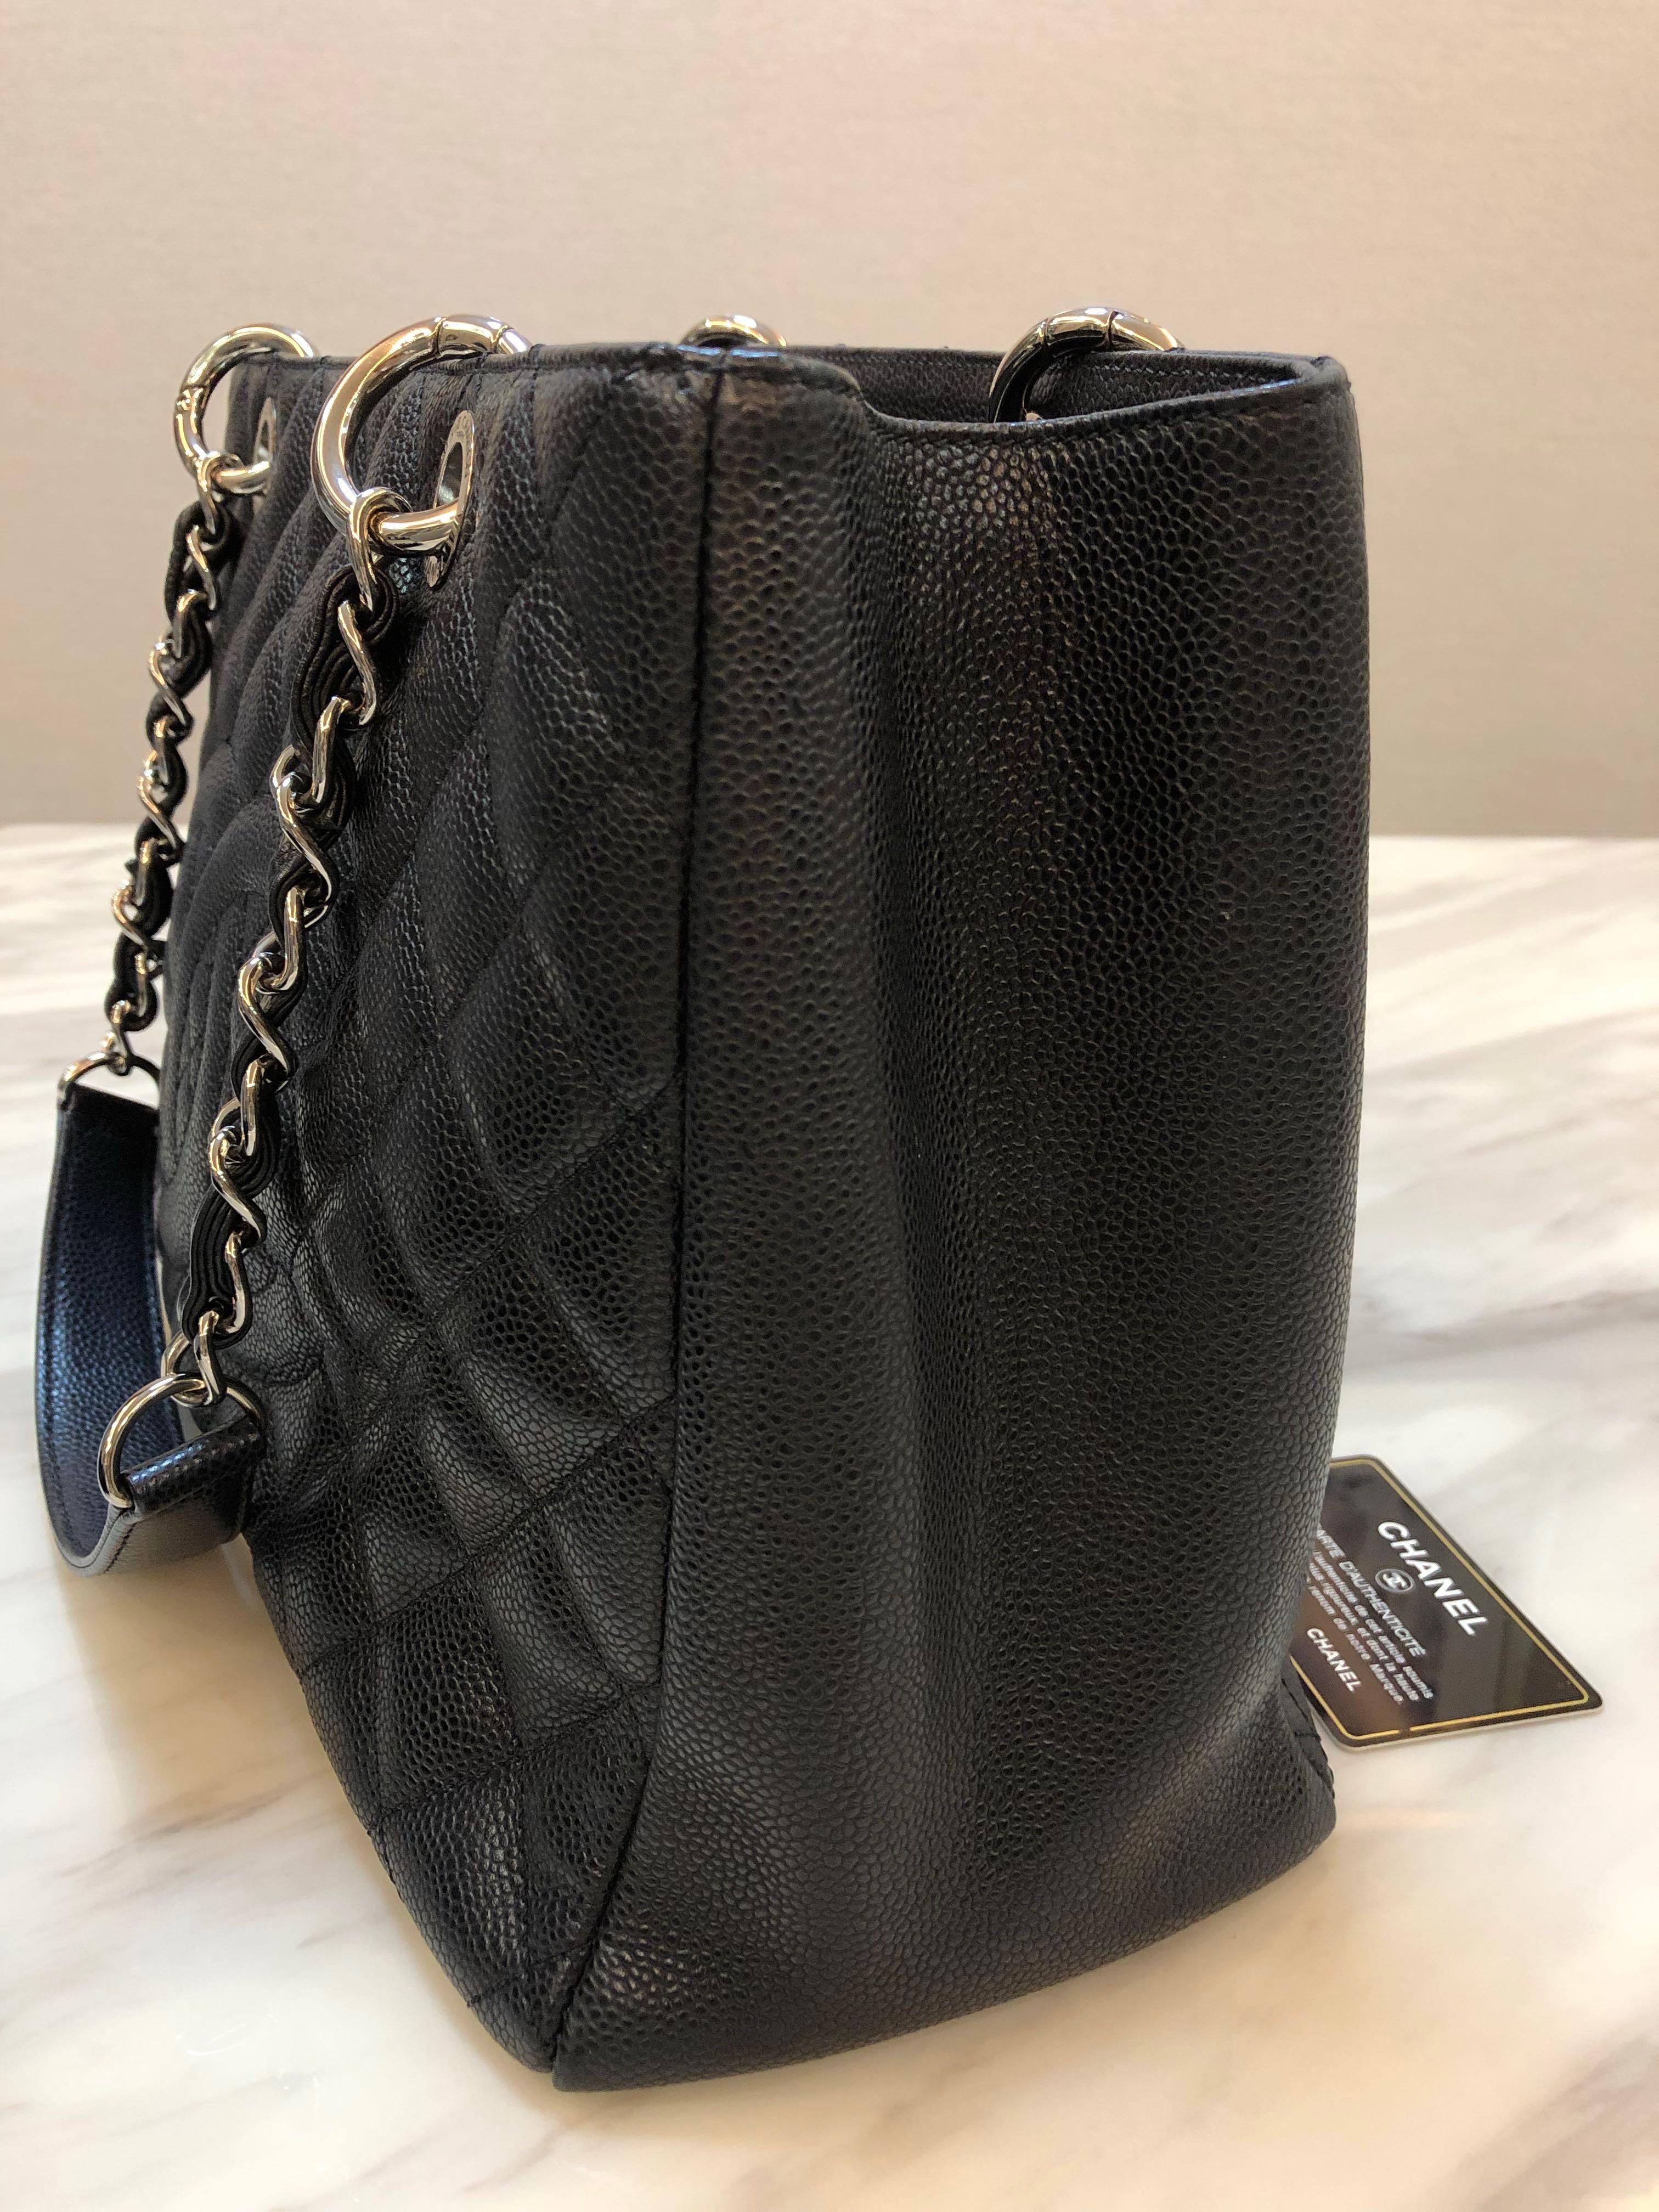 Price reduced! Almost new condition Chanel GST bag (100% authentic ...